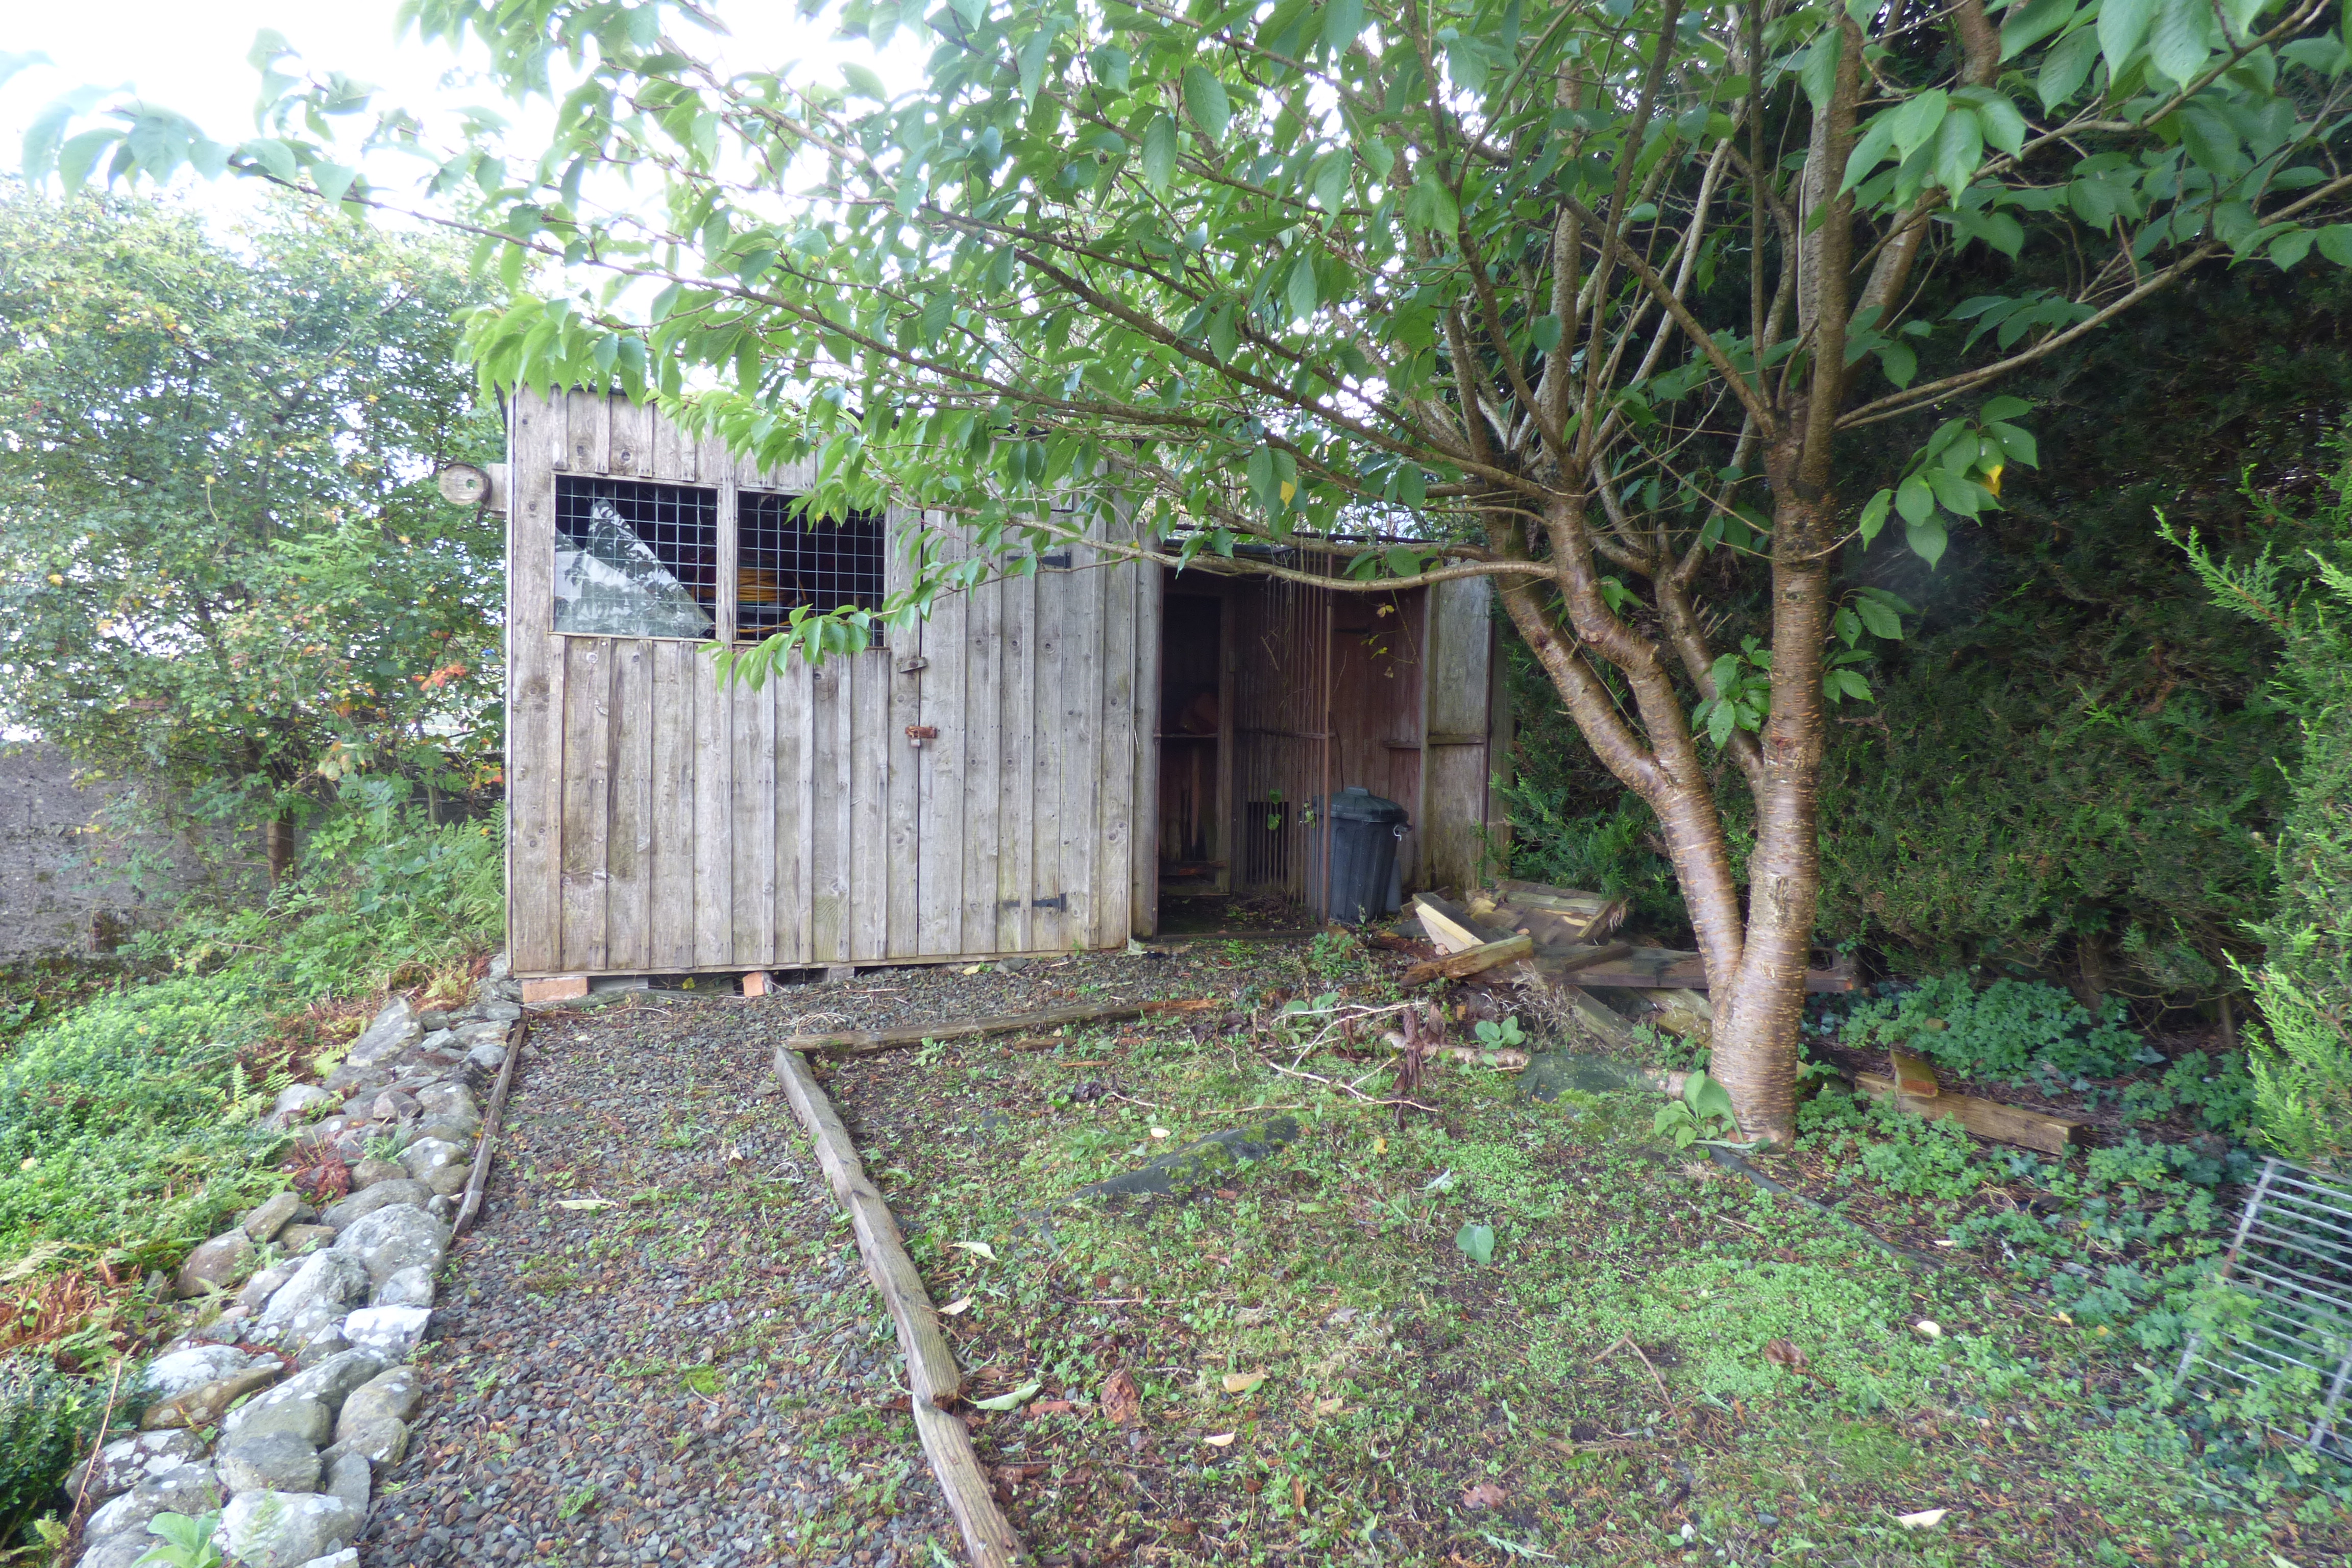 Photograph of Shed